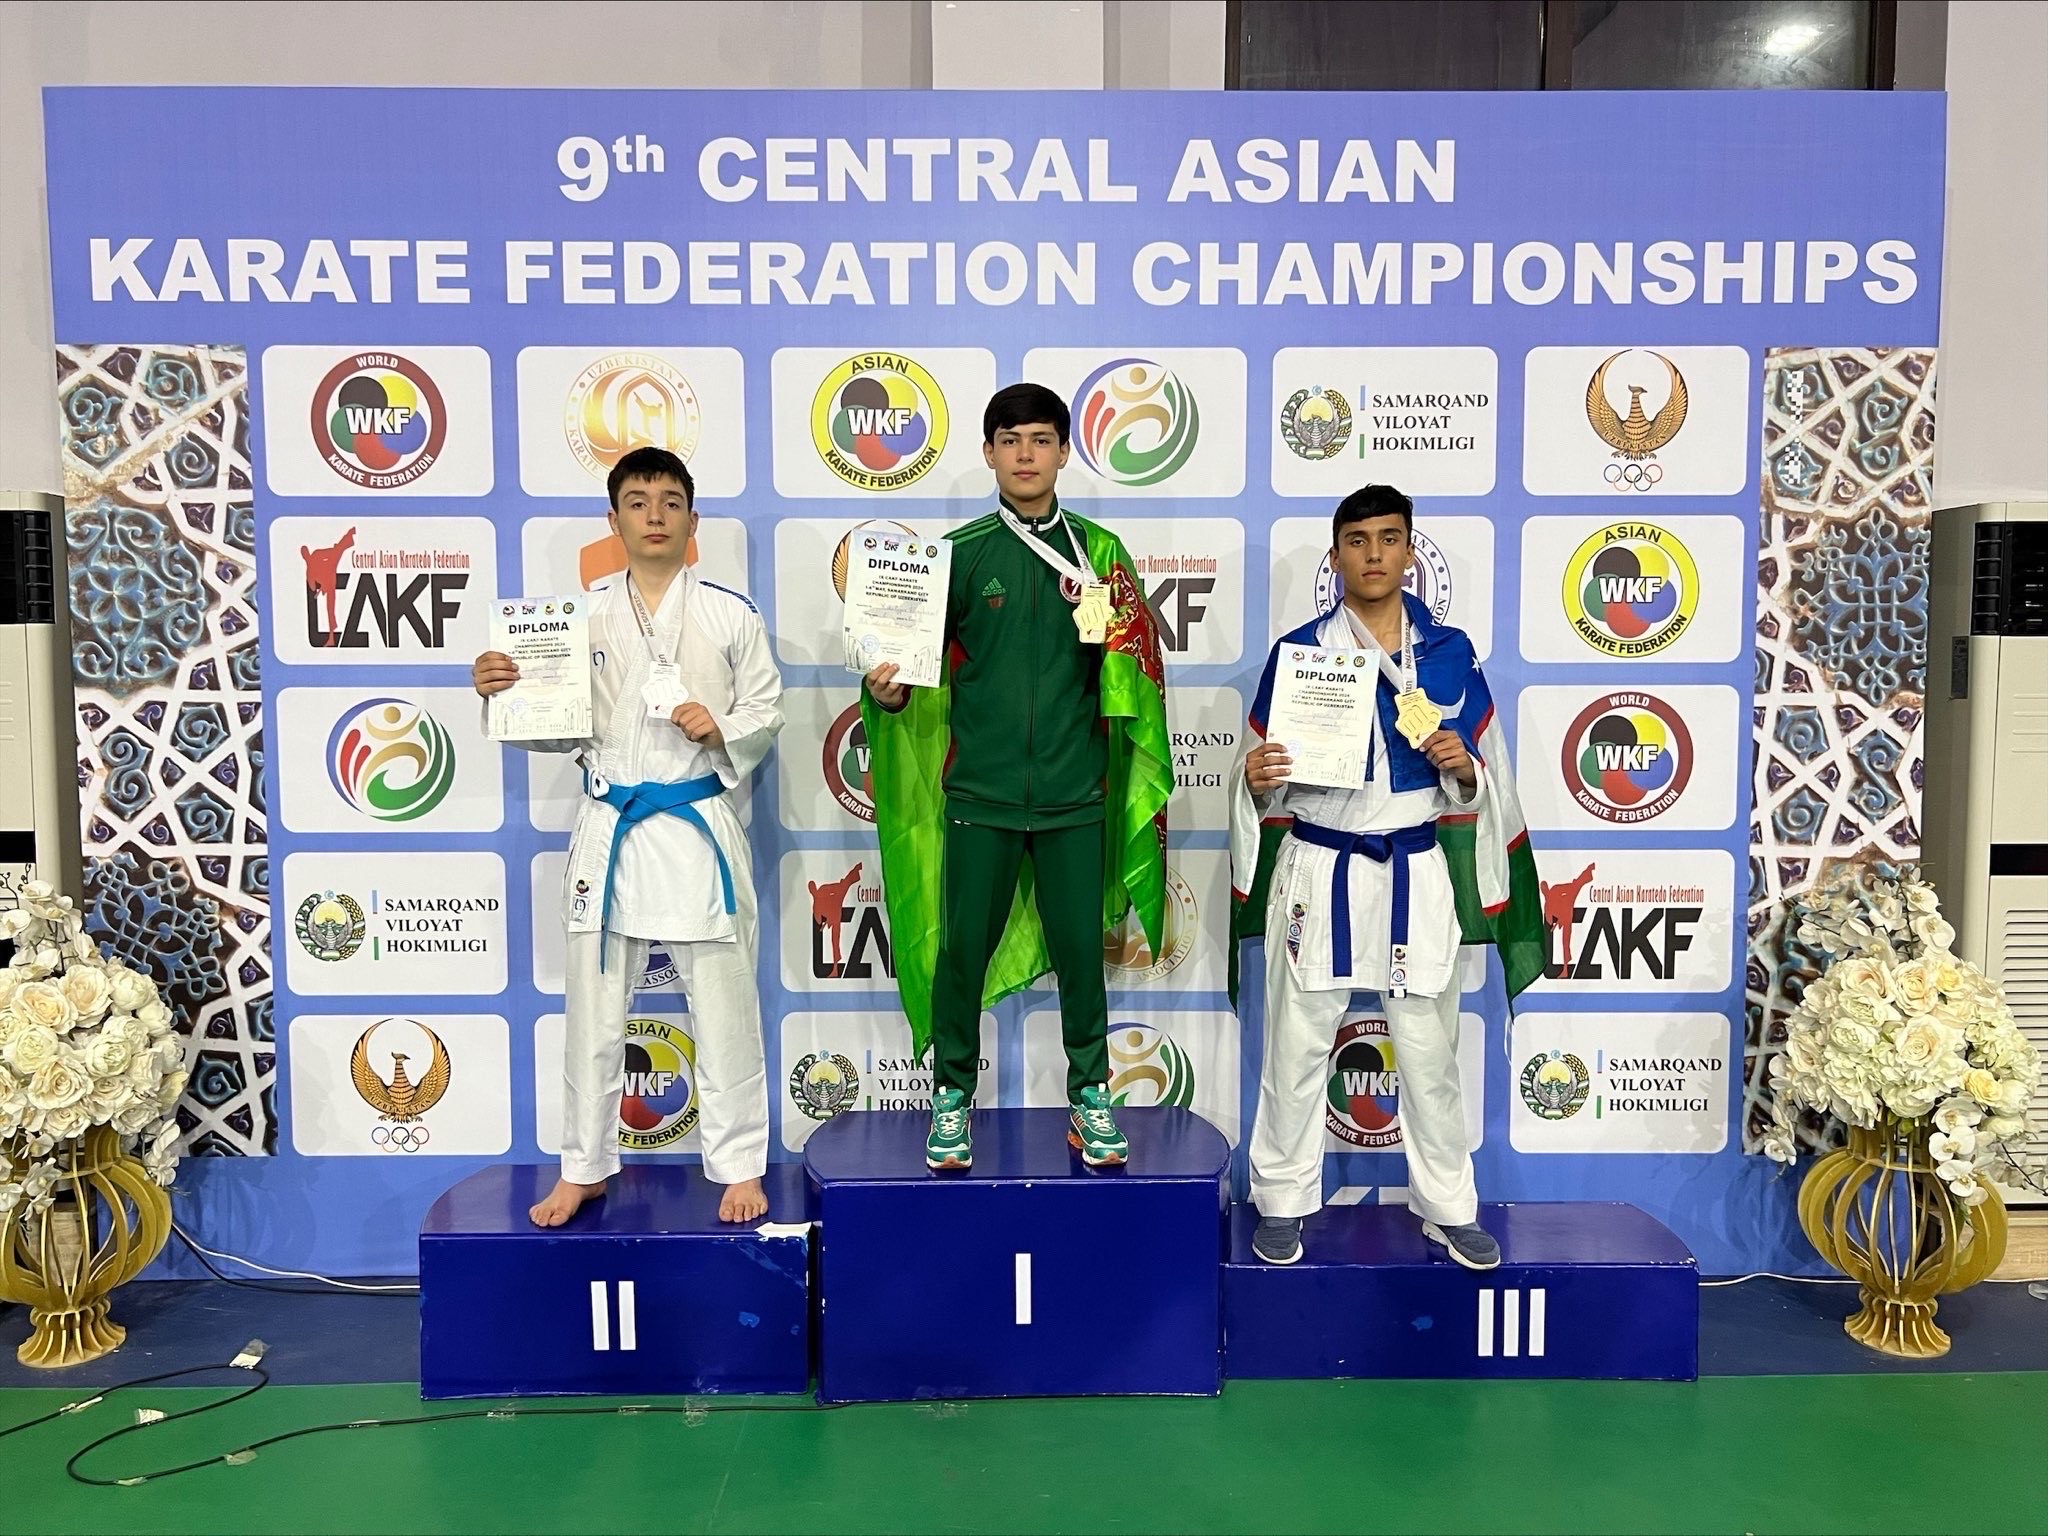 Karateka of Turkmenistan won 7 medals on the first day at the Central Asian Championship in Samarkand